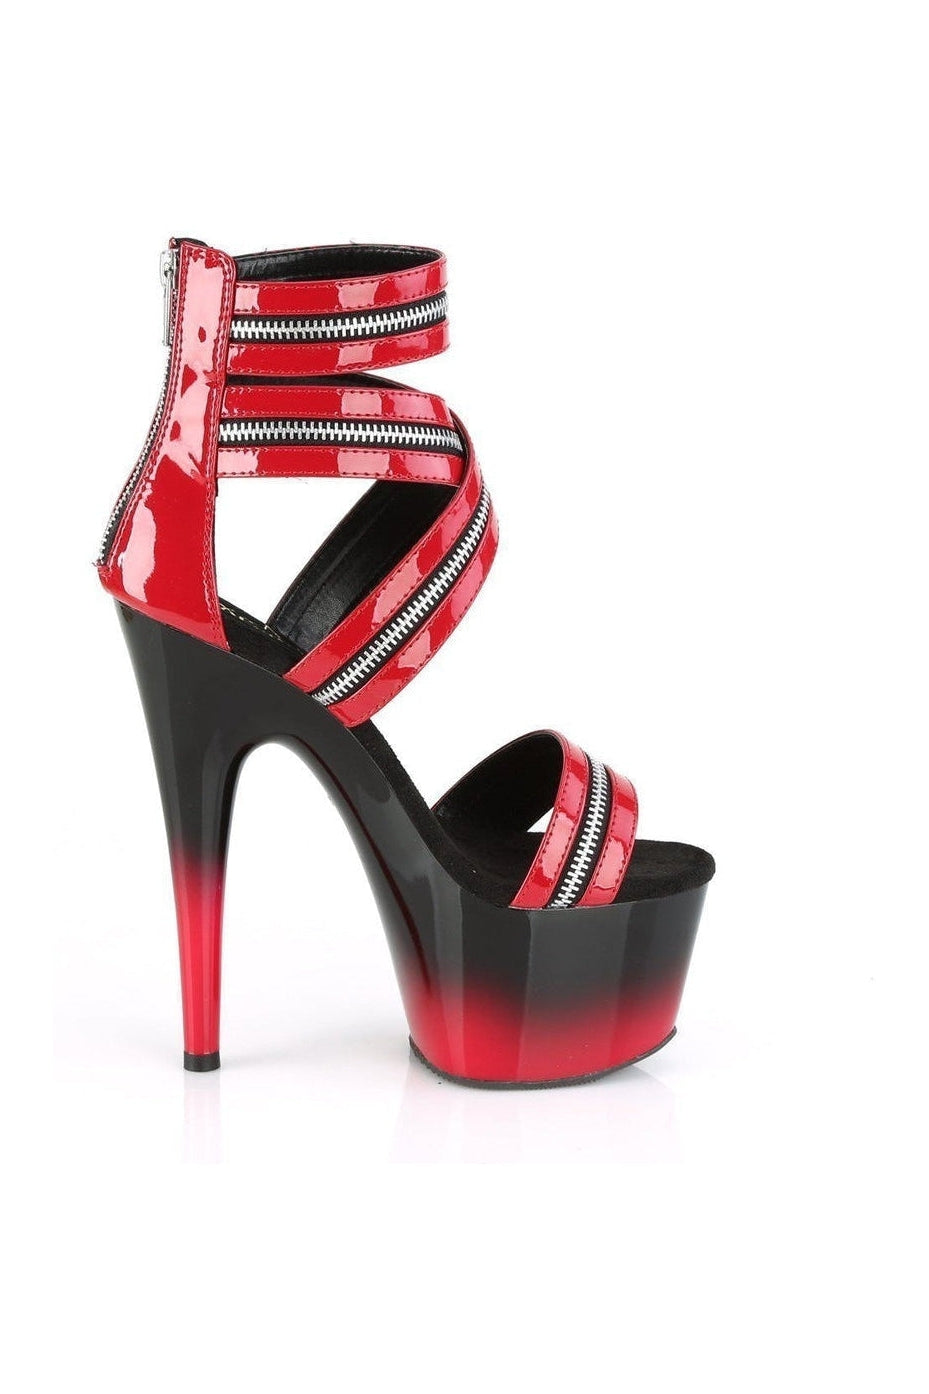 ADORE-766 Stripper Sandal | Red Patent-Pleaser